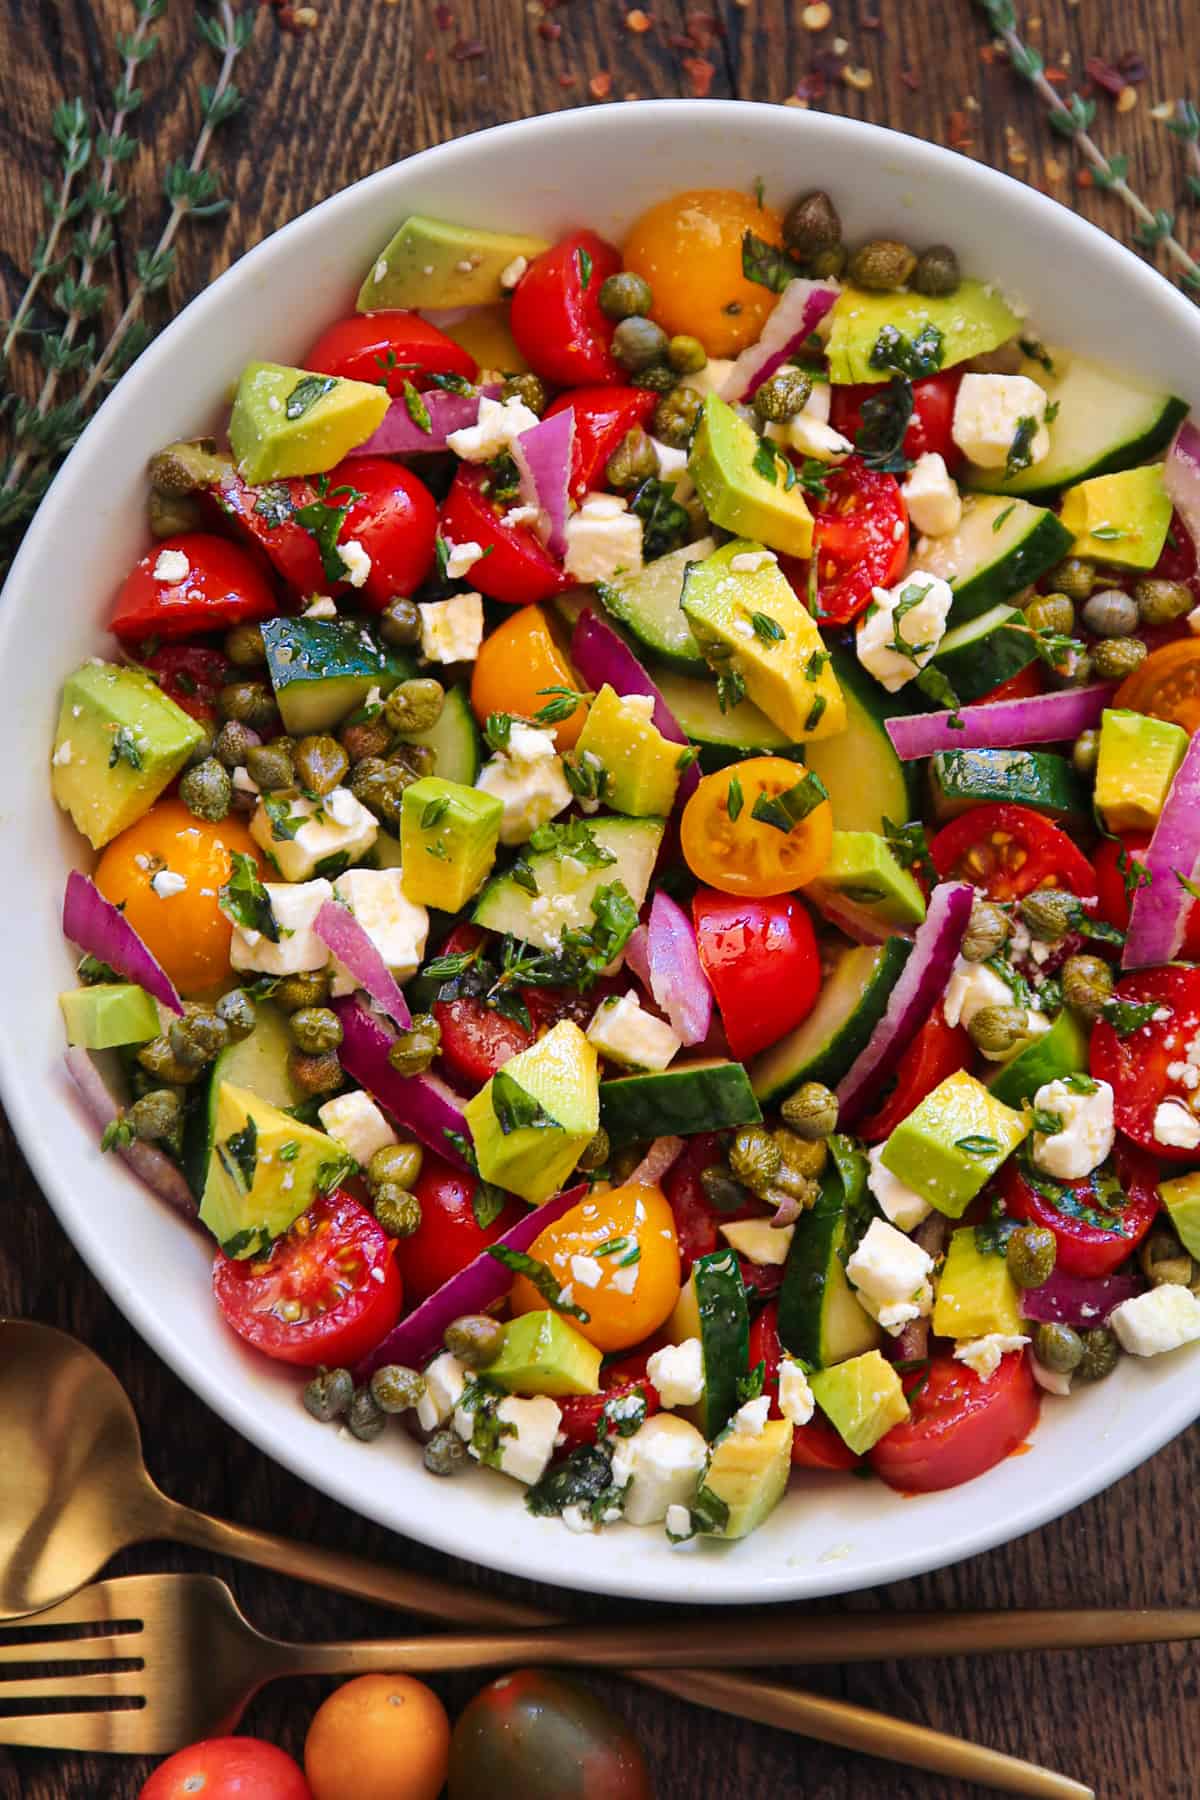 Greek Salad with tomatoes, cucumber, red onions, avocado, capers, and feta cheese - in a white bowl.